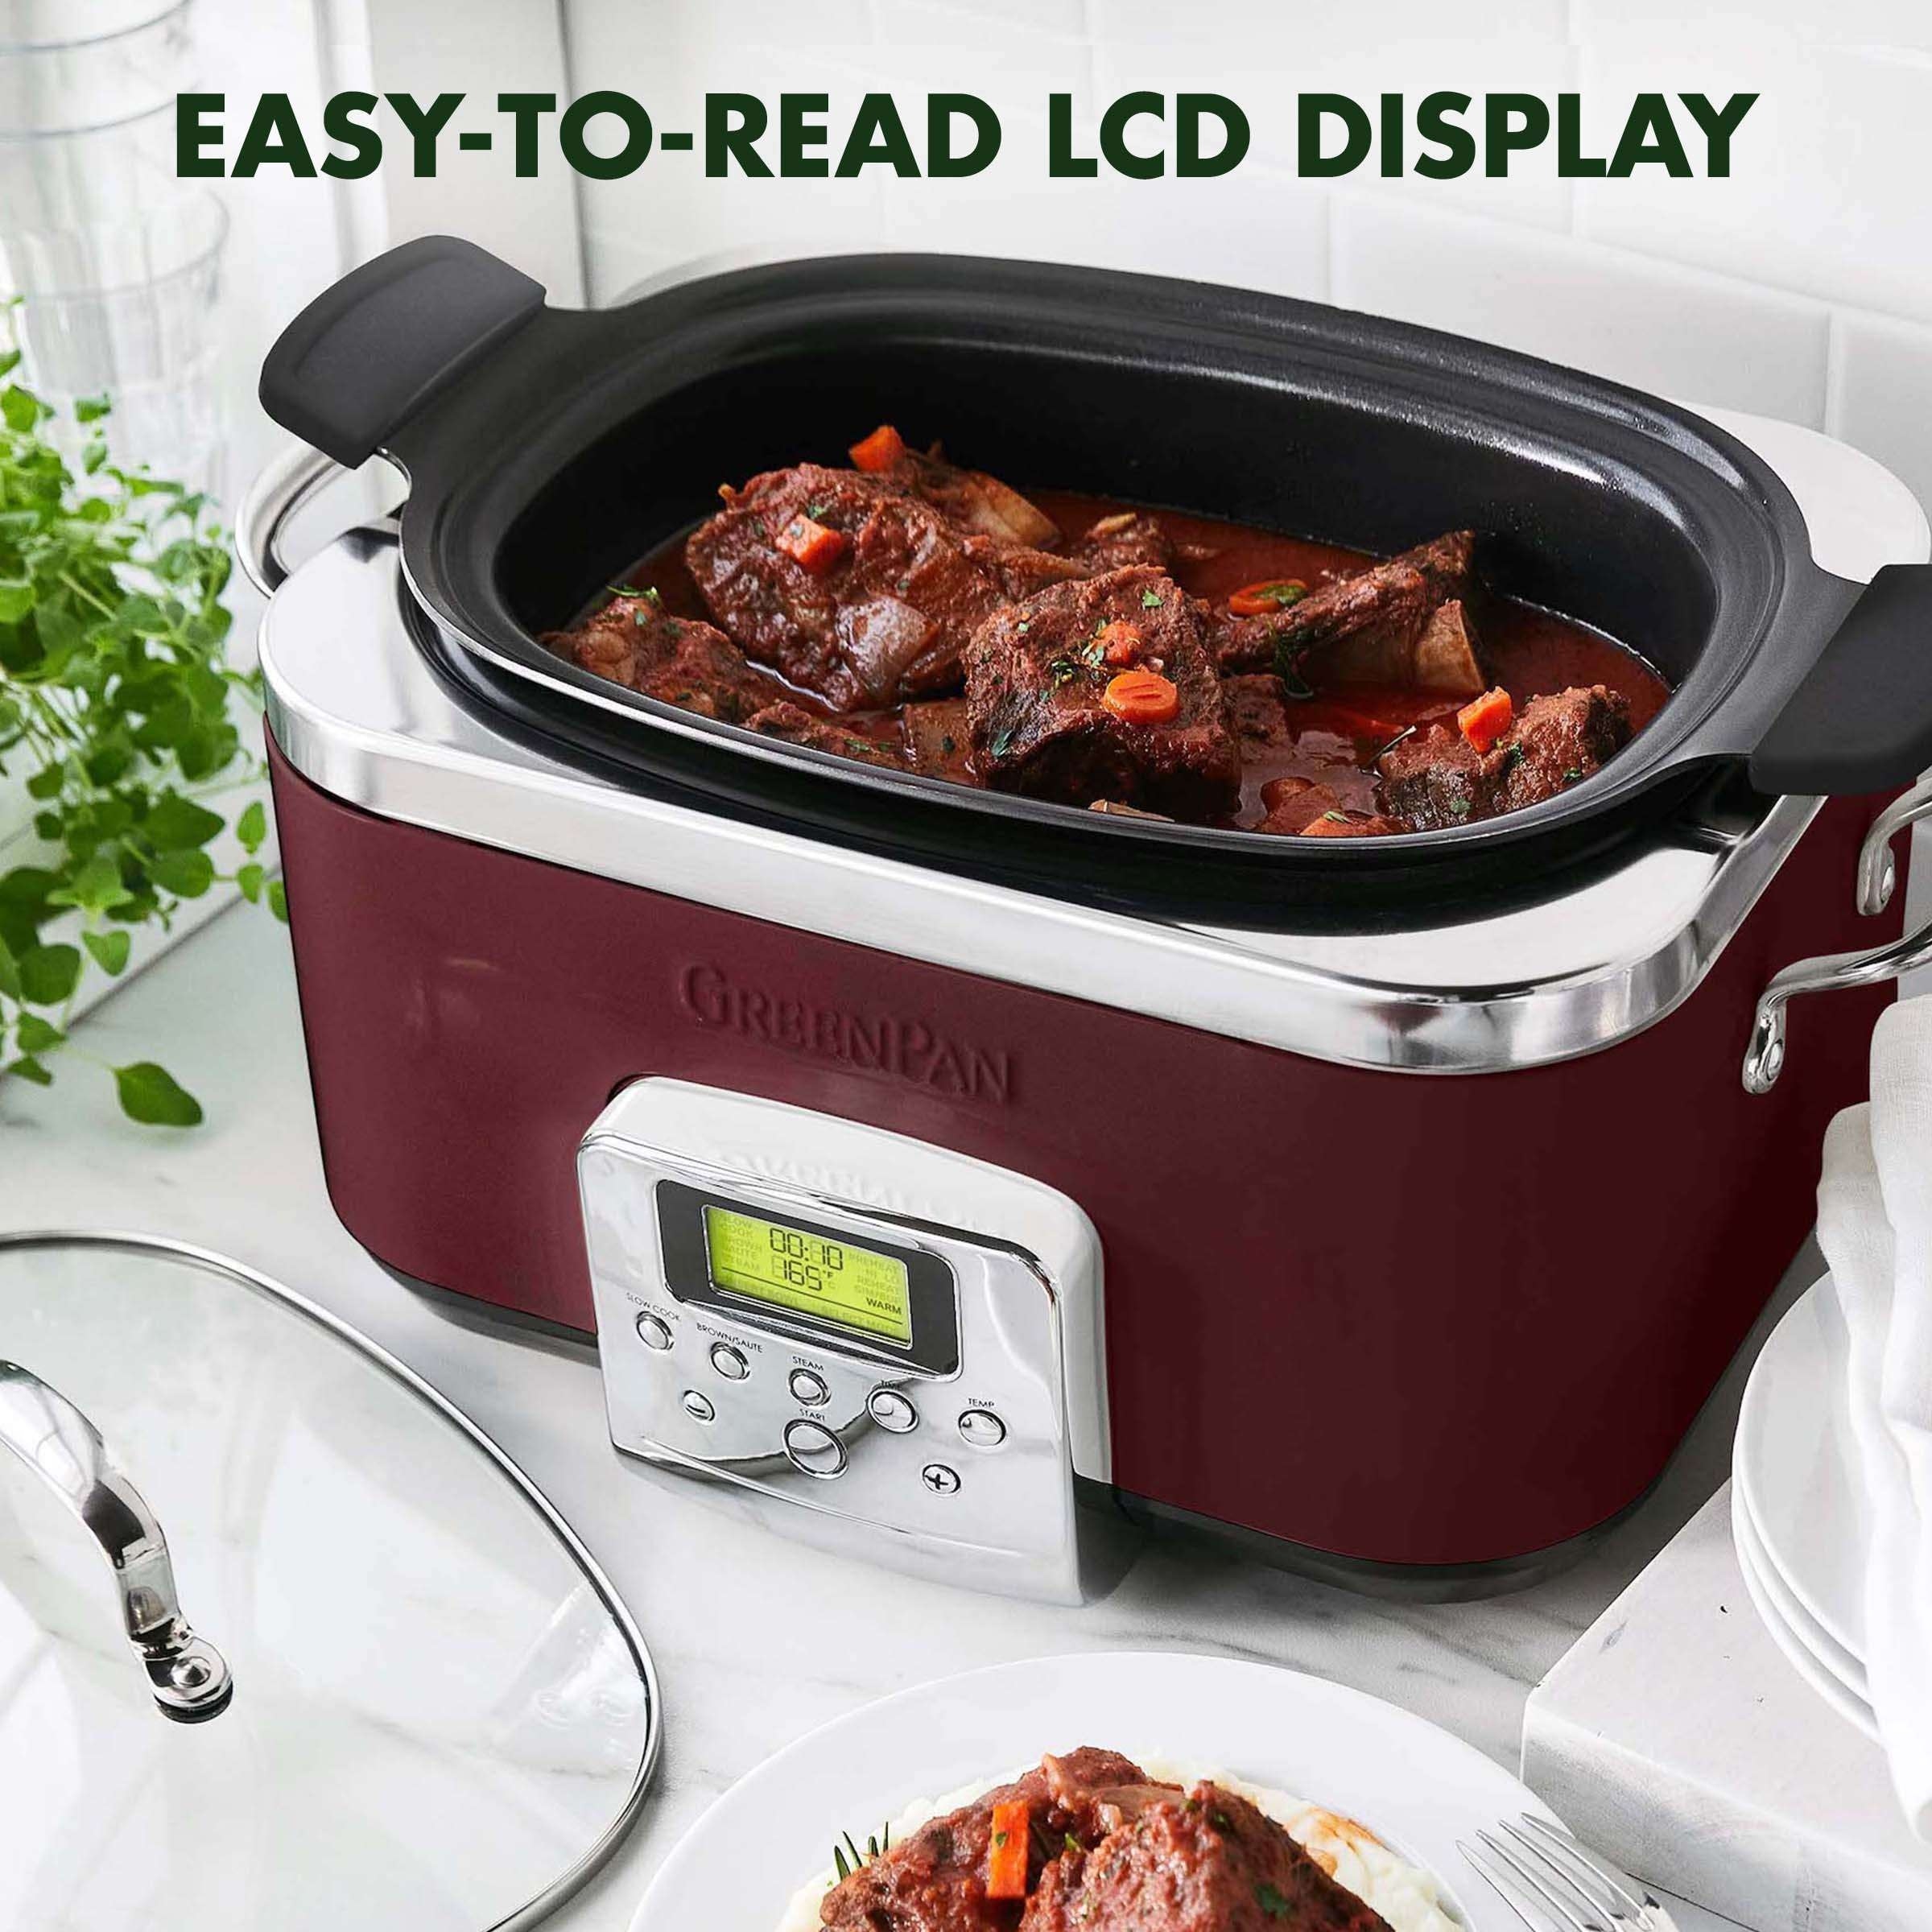 https://ak1.ostkcdn.com/images/products/is/images/direct/aa4a58f4d6081555731f25b0fda95a14c8cfd2ae/GreenPan-Elite-6-Quart-Slow-Cooker.jpg